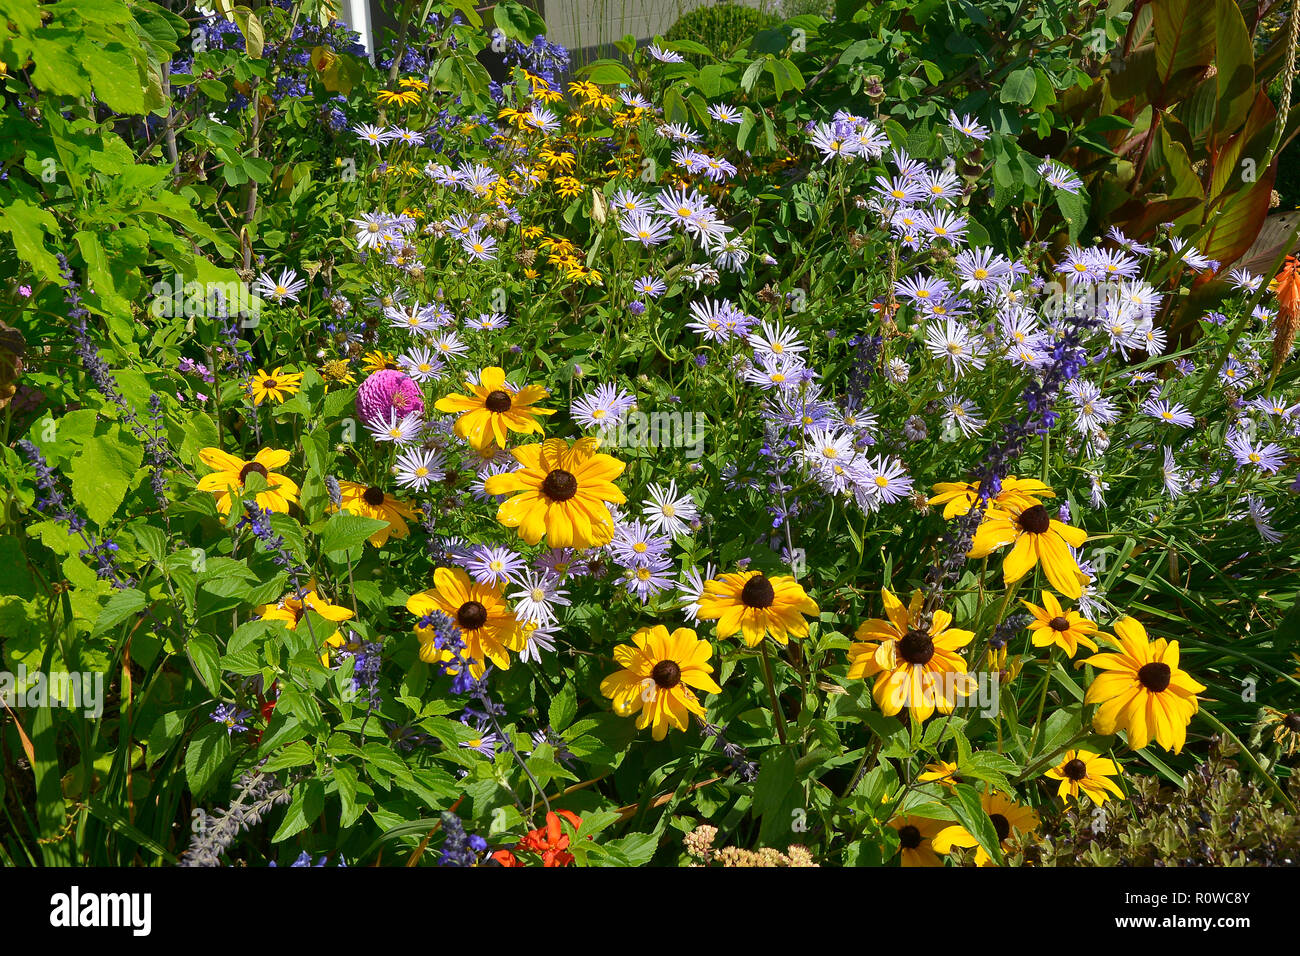 Flower border with Rudbeckia hirta Black Eyed Susan and Aster amellus in a country garden Stock Photo